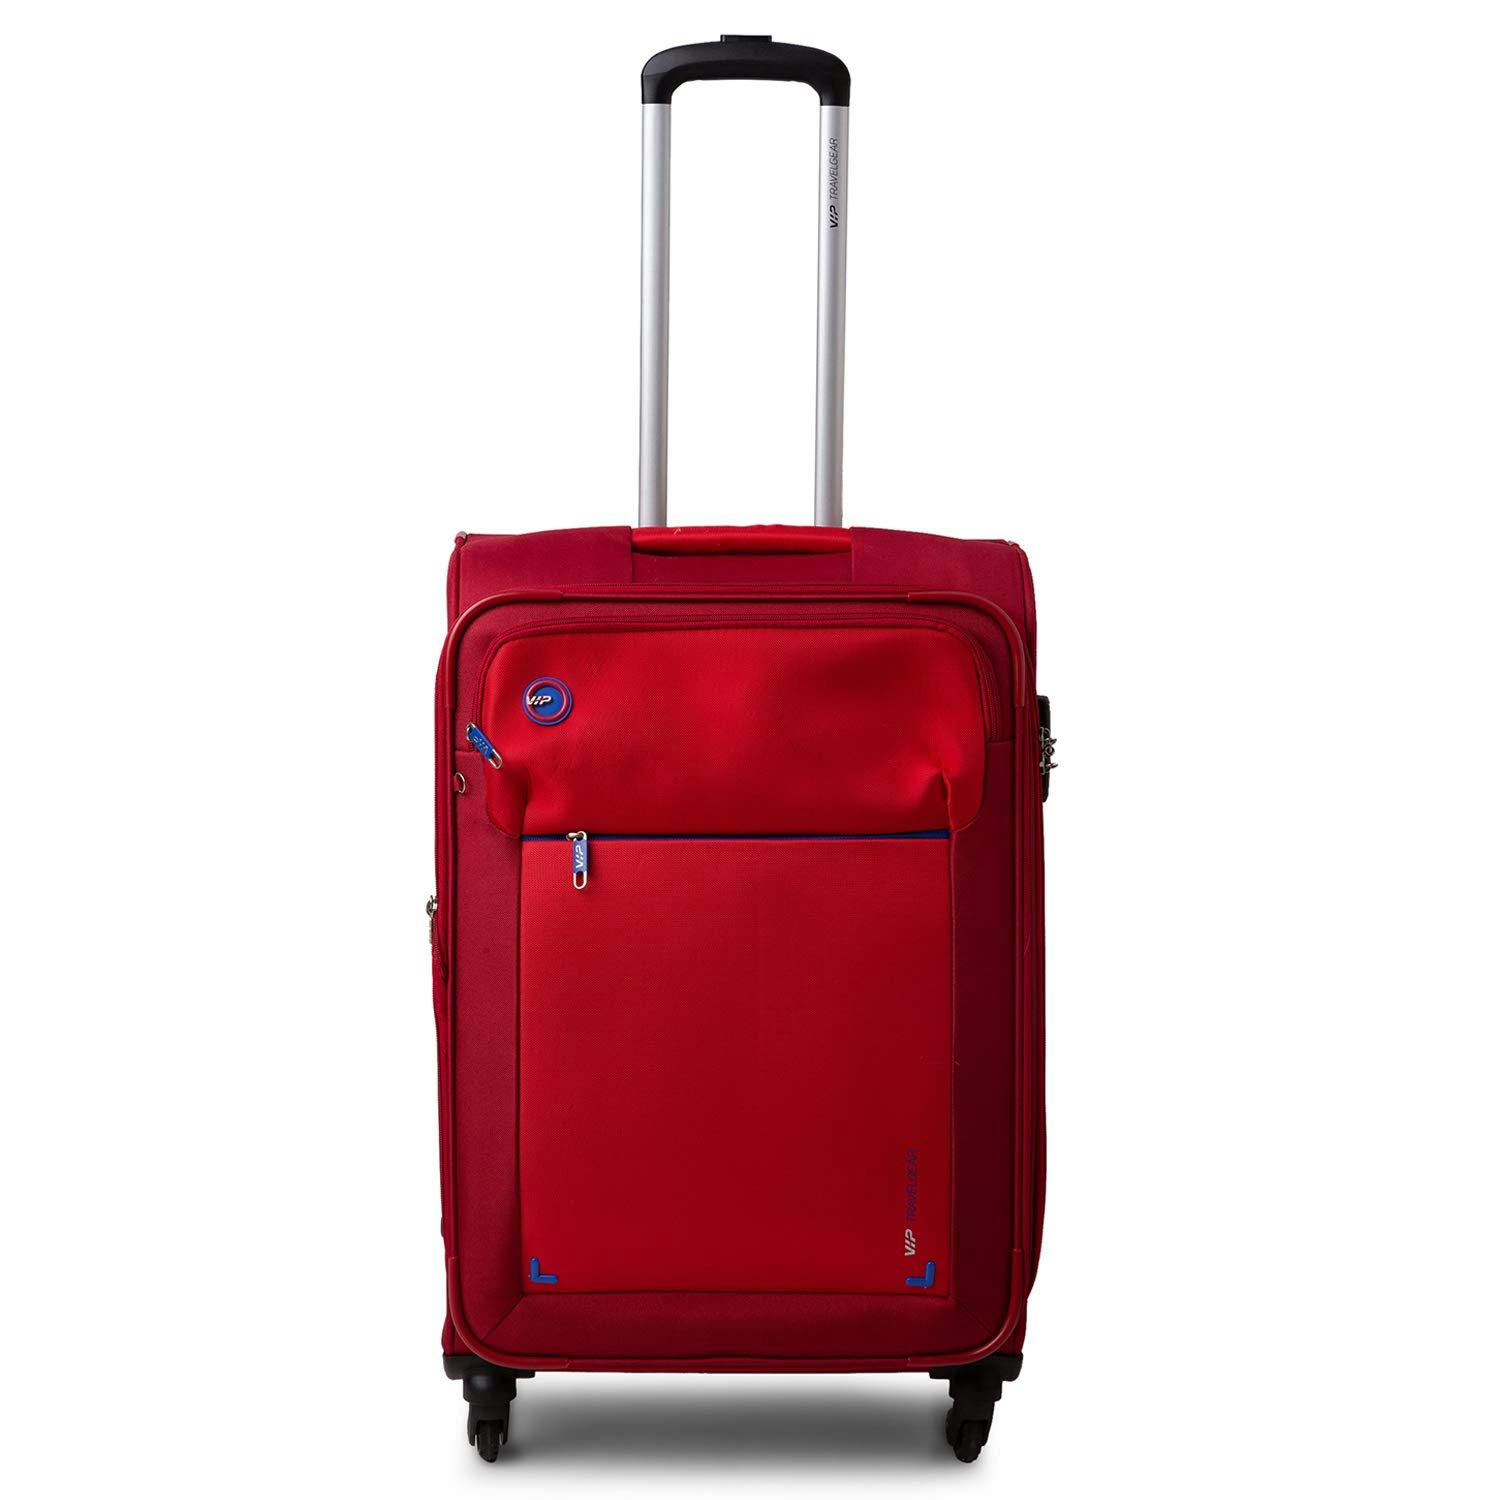 VIP Lido Polyester 54 cms Cabin Luggage at Rs 1899 only